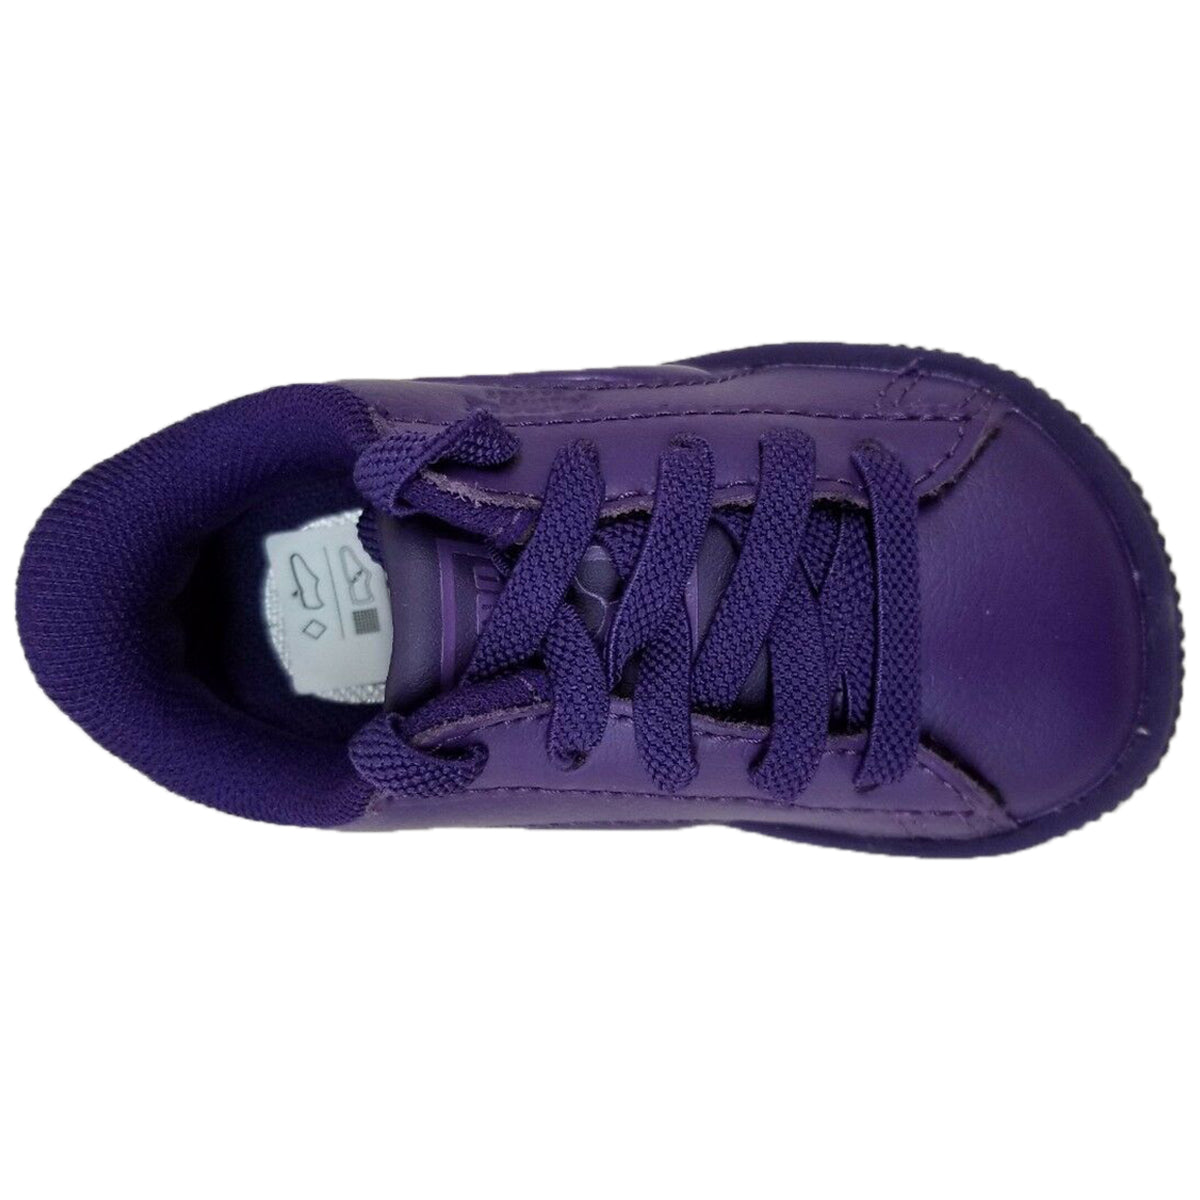 Puma Basket Classic 3d Fs Toddlers Style : 363905